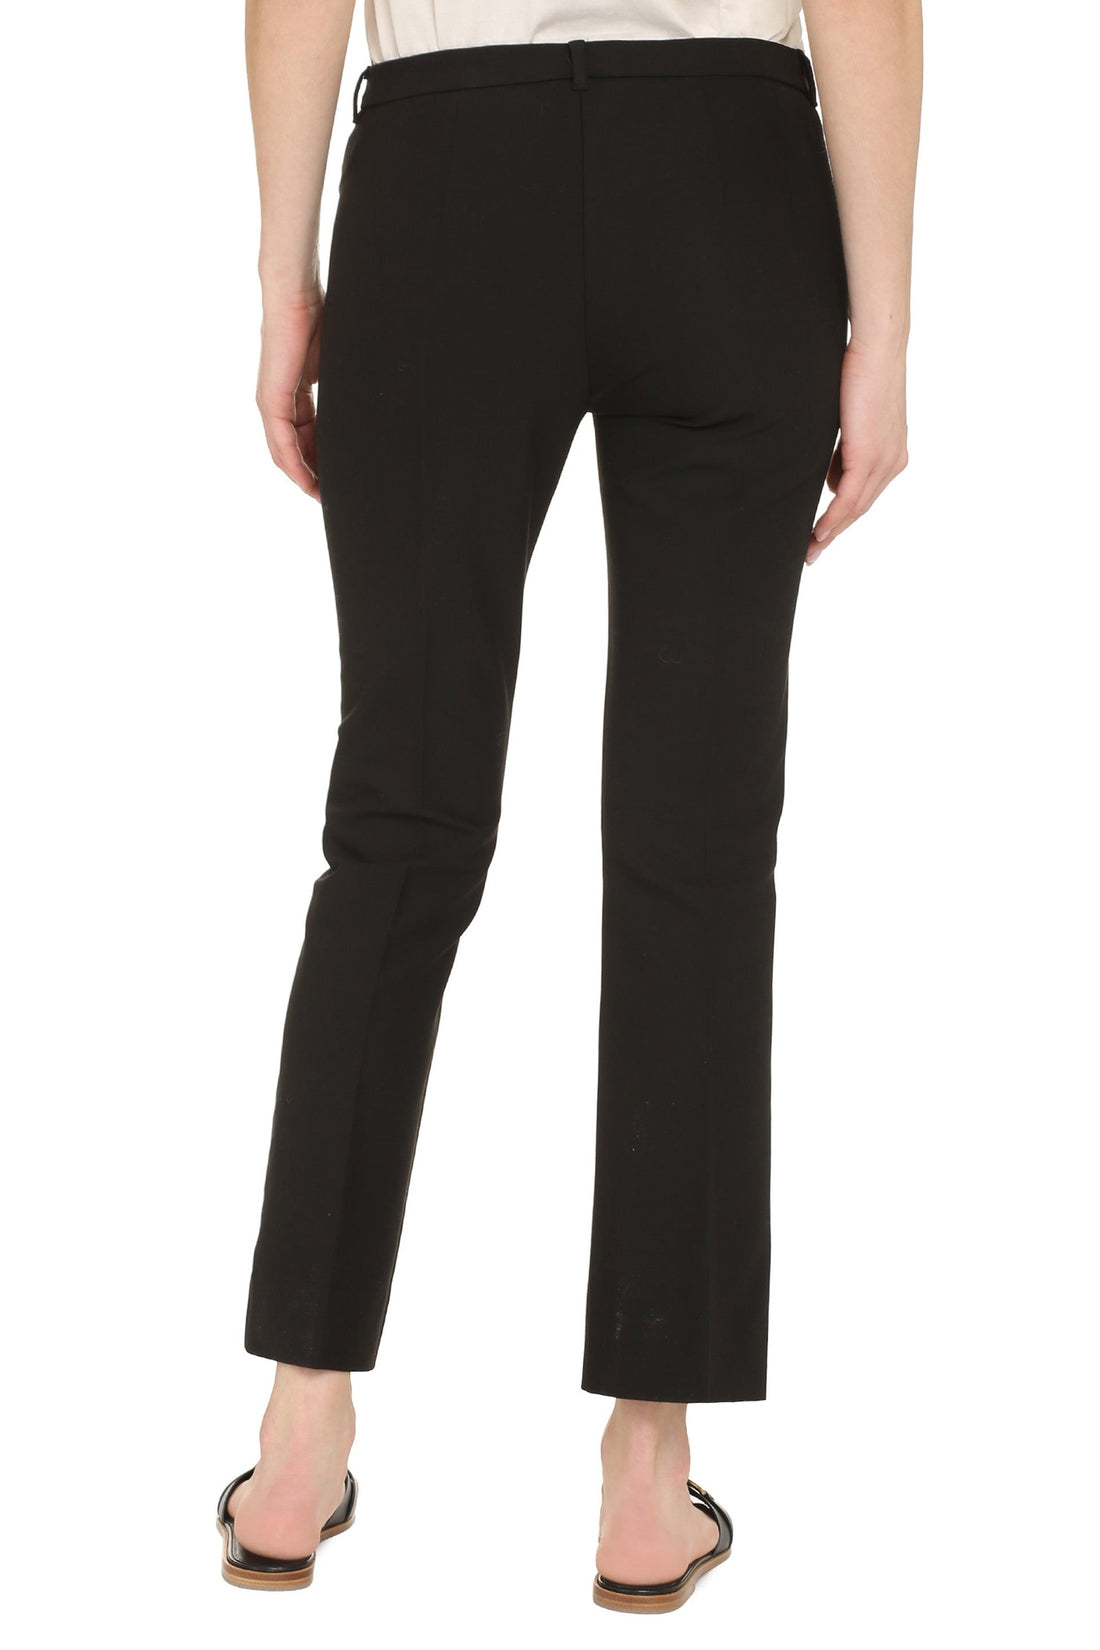 S MAX MARA-OUTLET-SALE-Fatina cropped trousers-ARCHIVIST